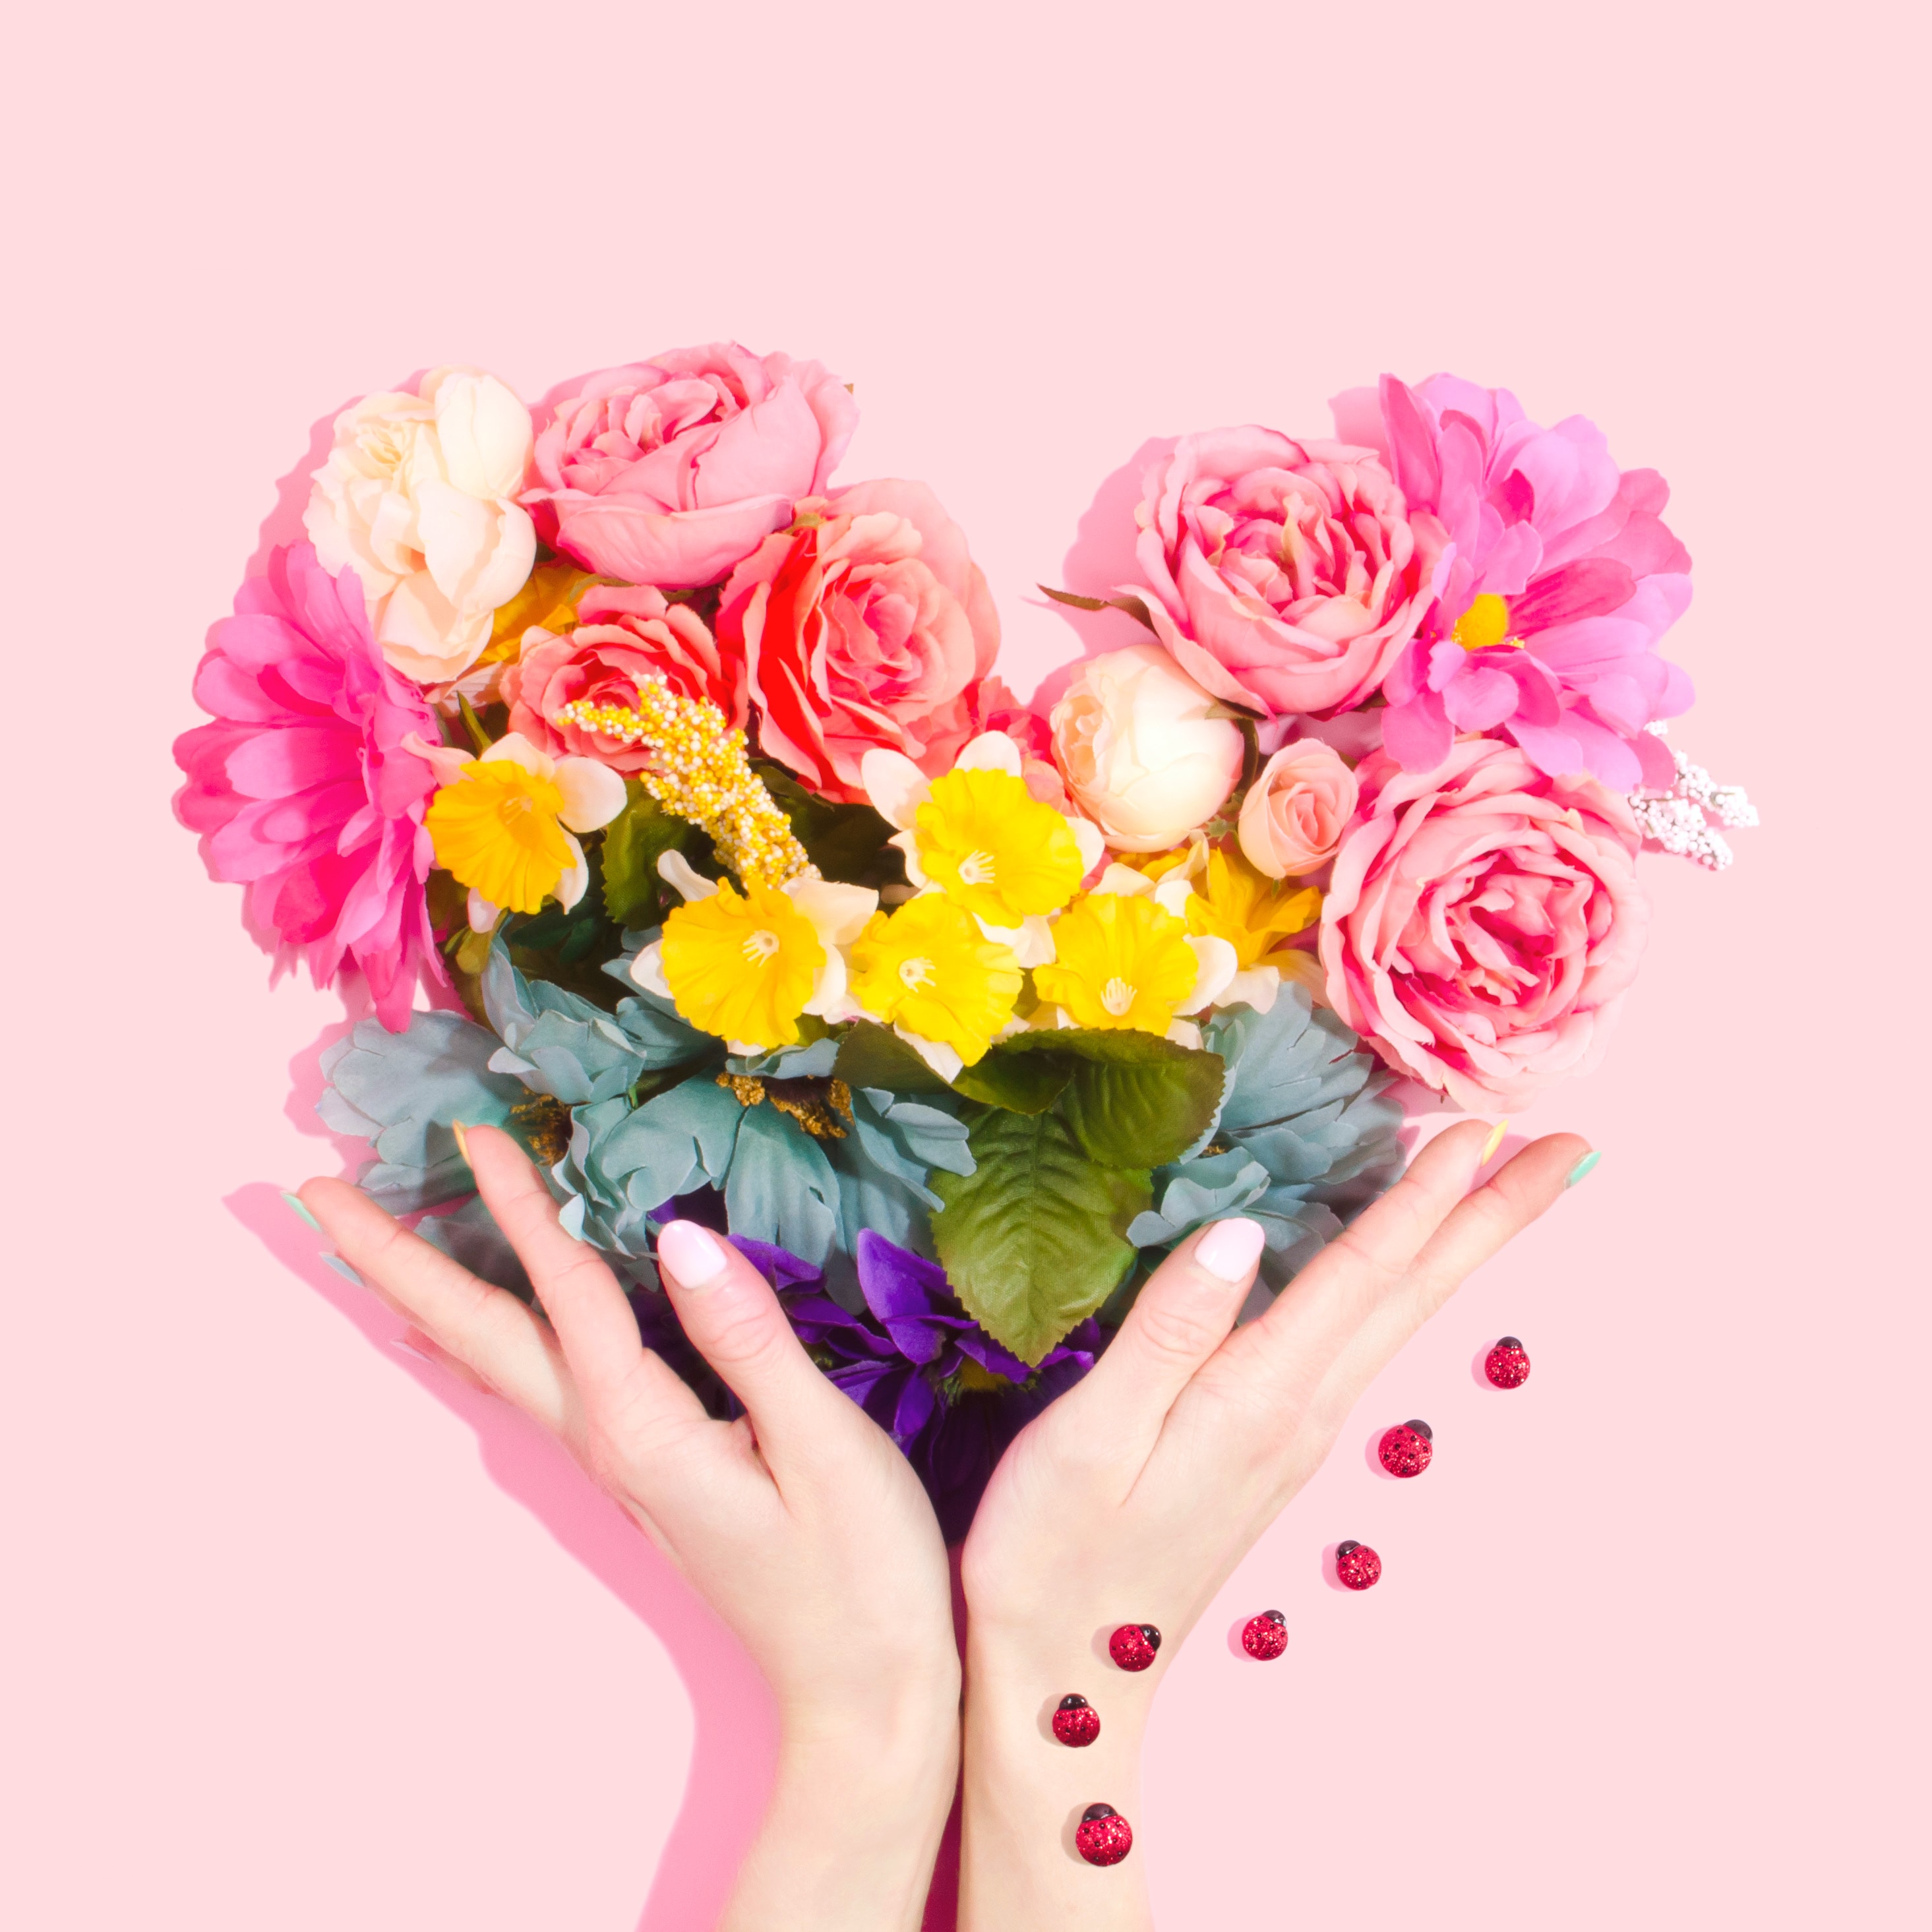 On a pink background, two hands offer up a heart made up of many different flowers.